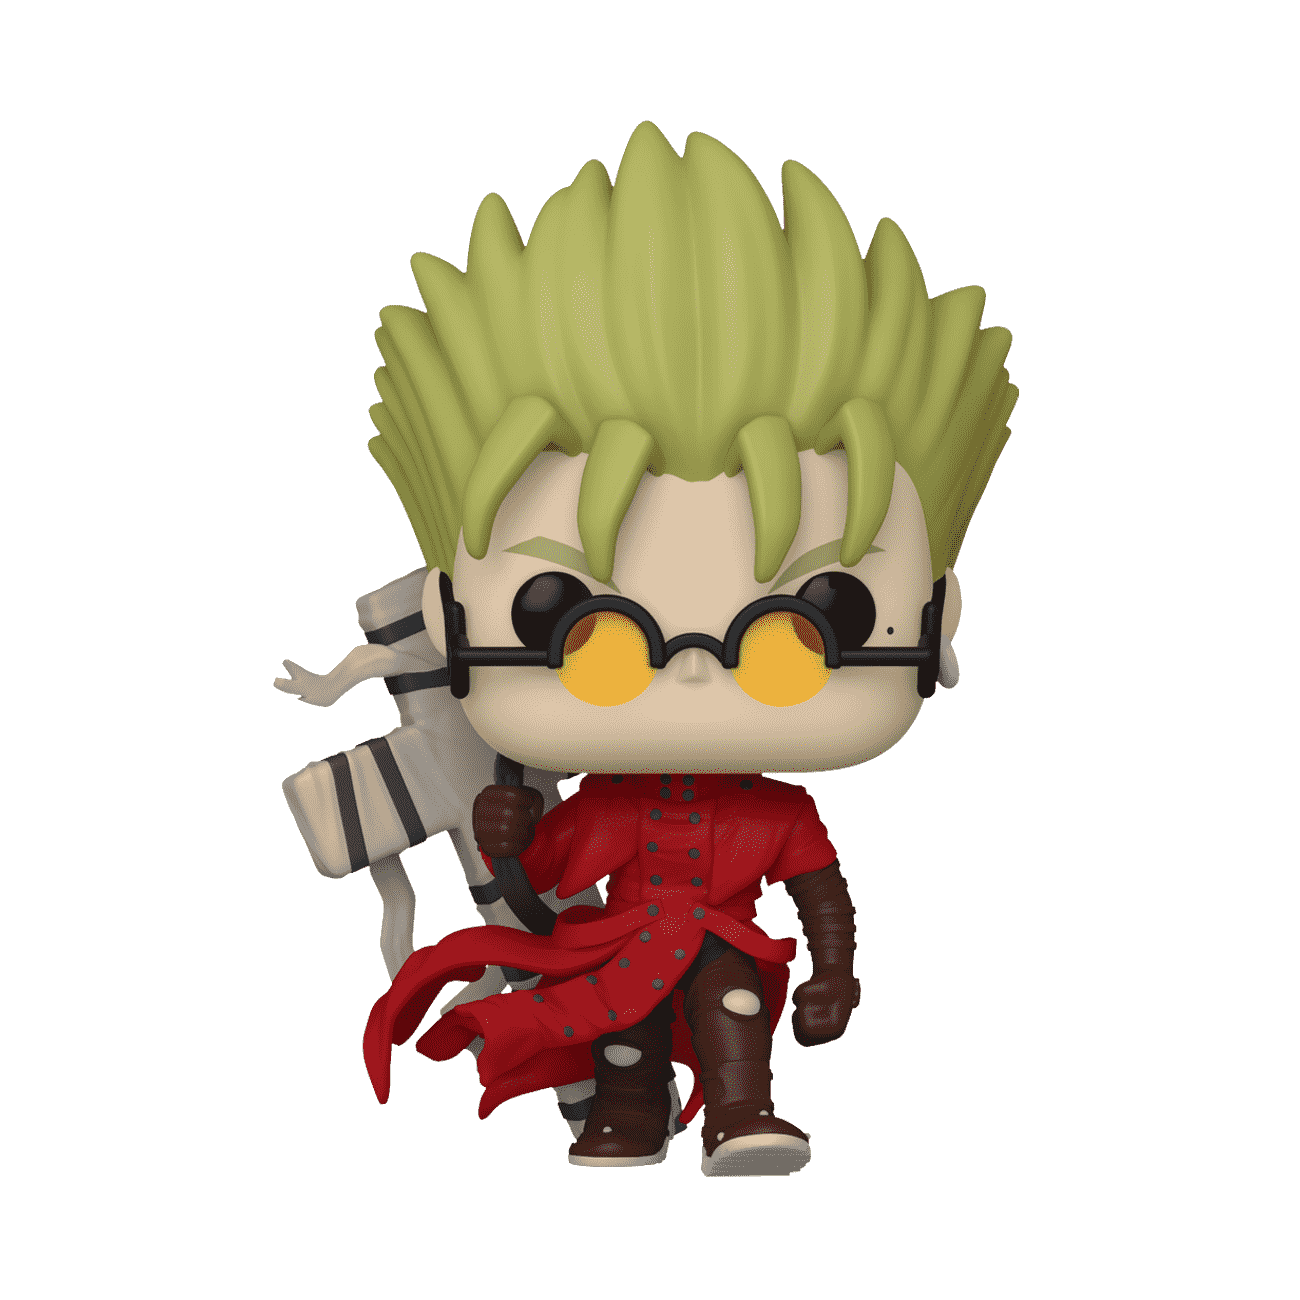 Buy Pop! Vash the Stampede with Punisher Cross at Funko.